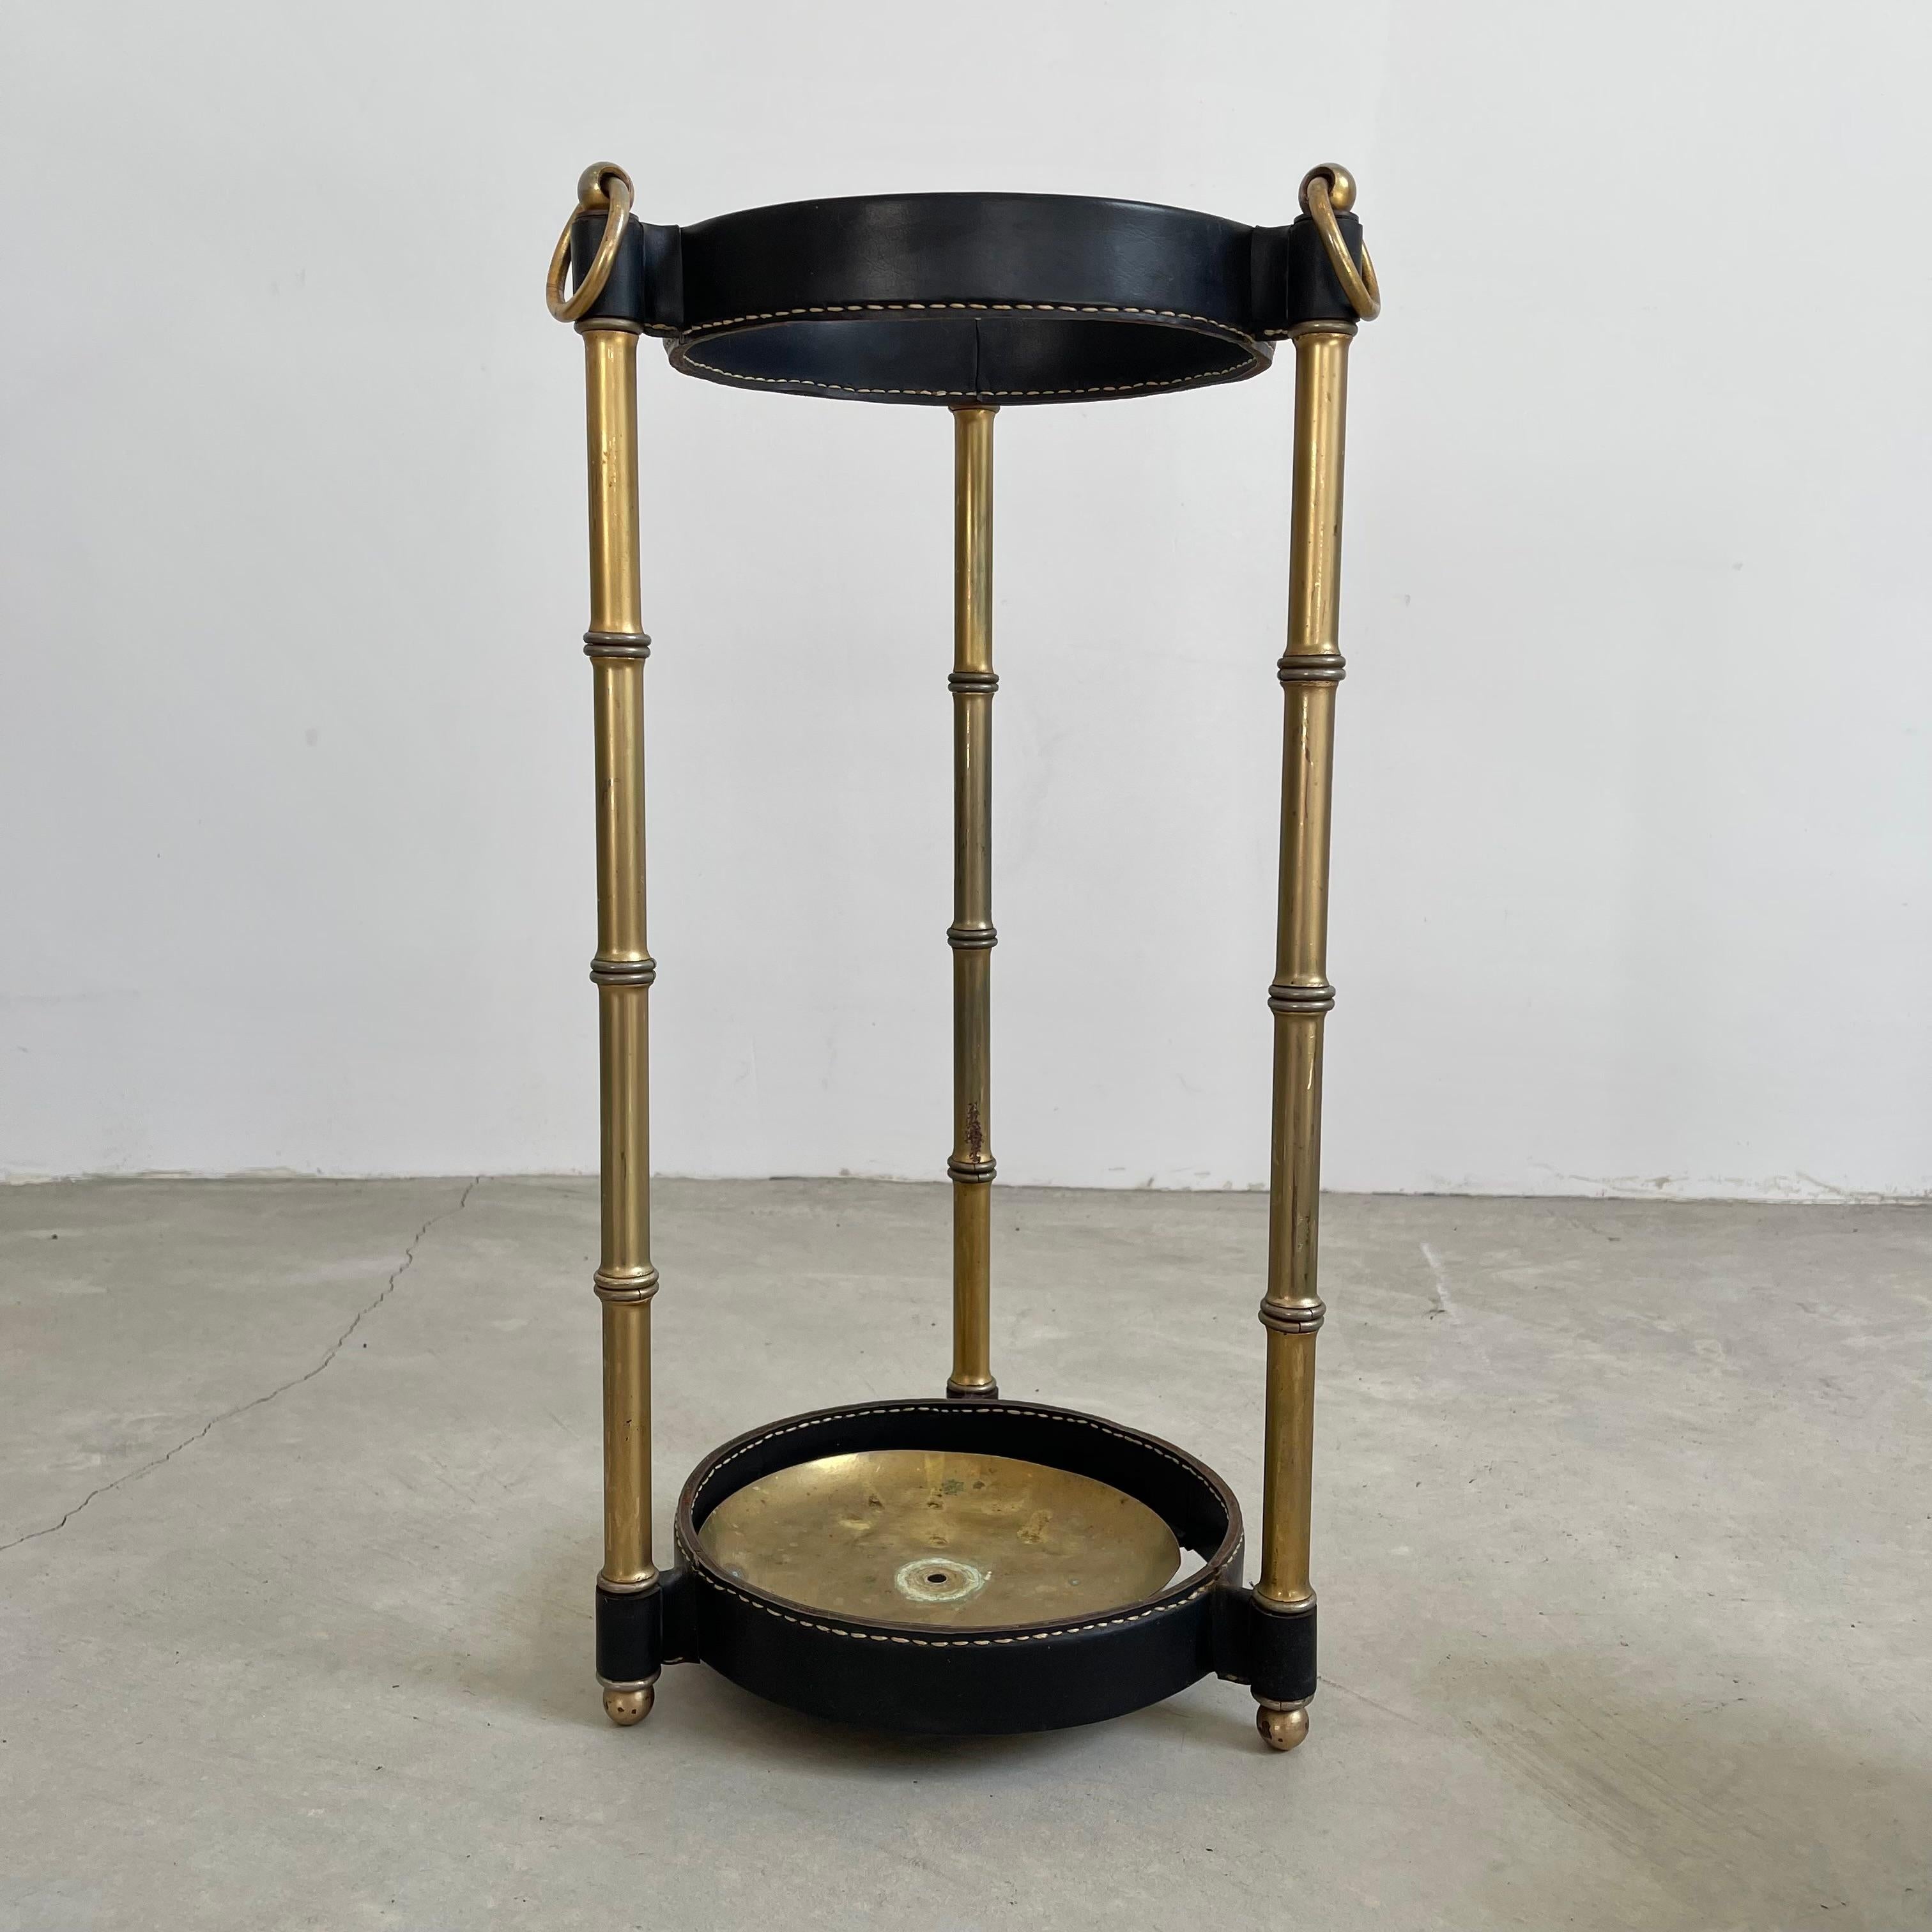 Jacques Adnet Leather and Brass Umbrella Stand, 1950s For Sale 4